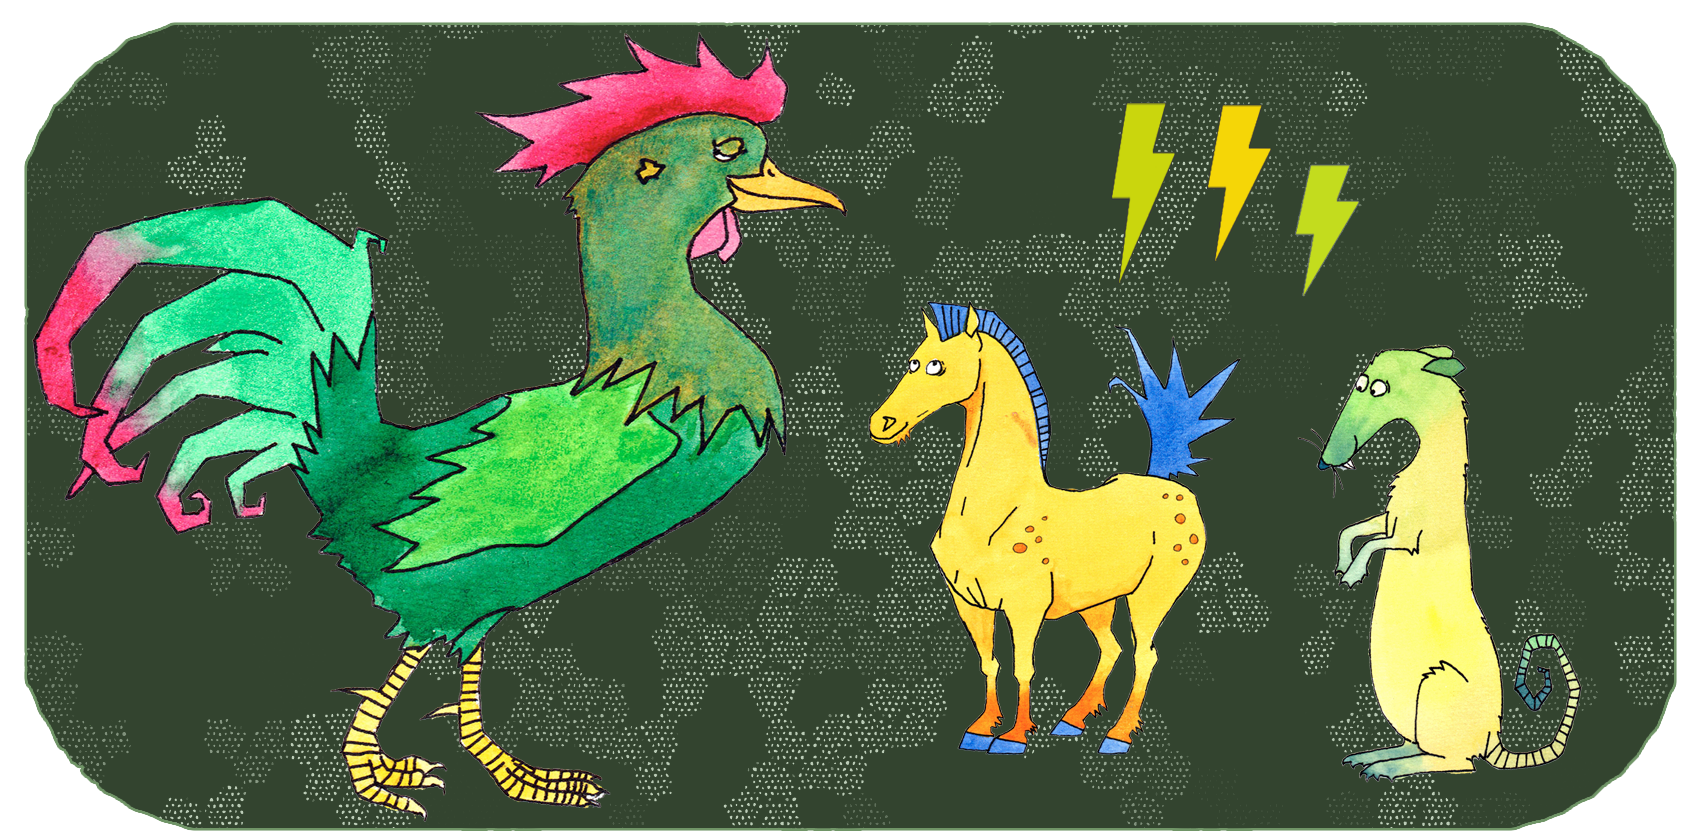 Chinese zodiac animals | 3 years apart | The Rooster